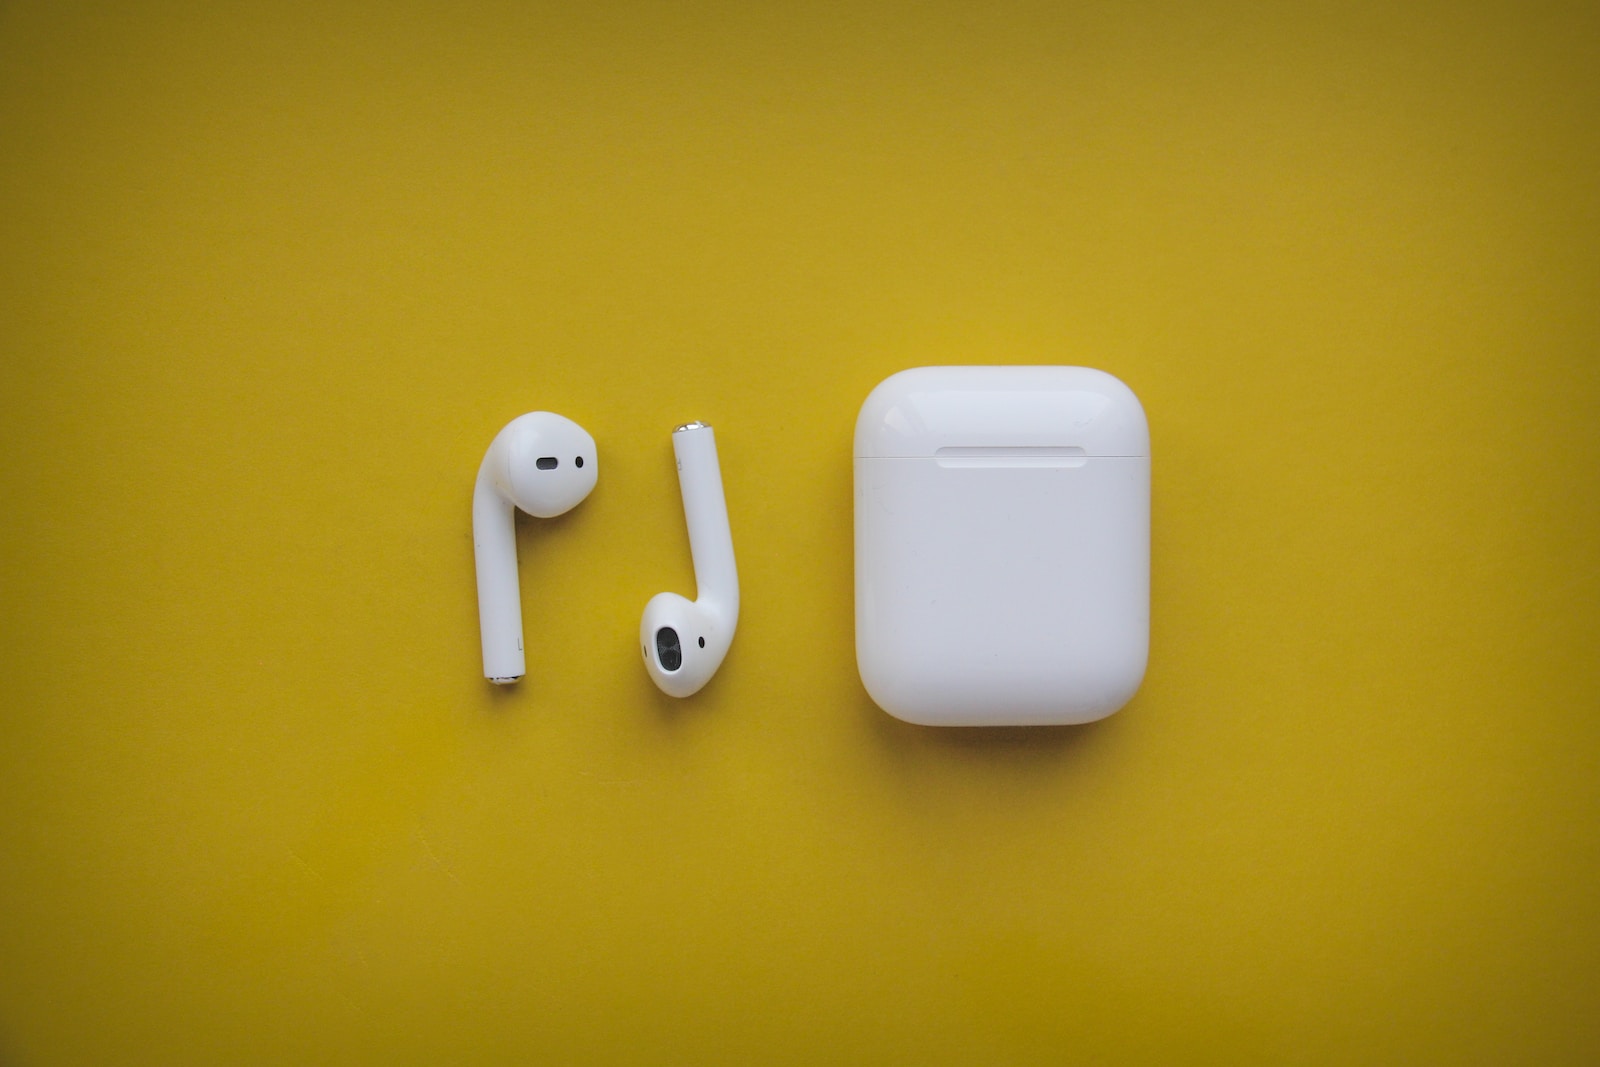 Why are airpods not connecting to computer?